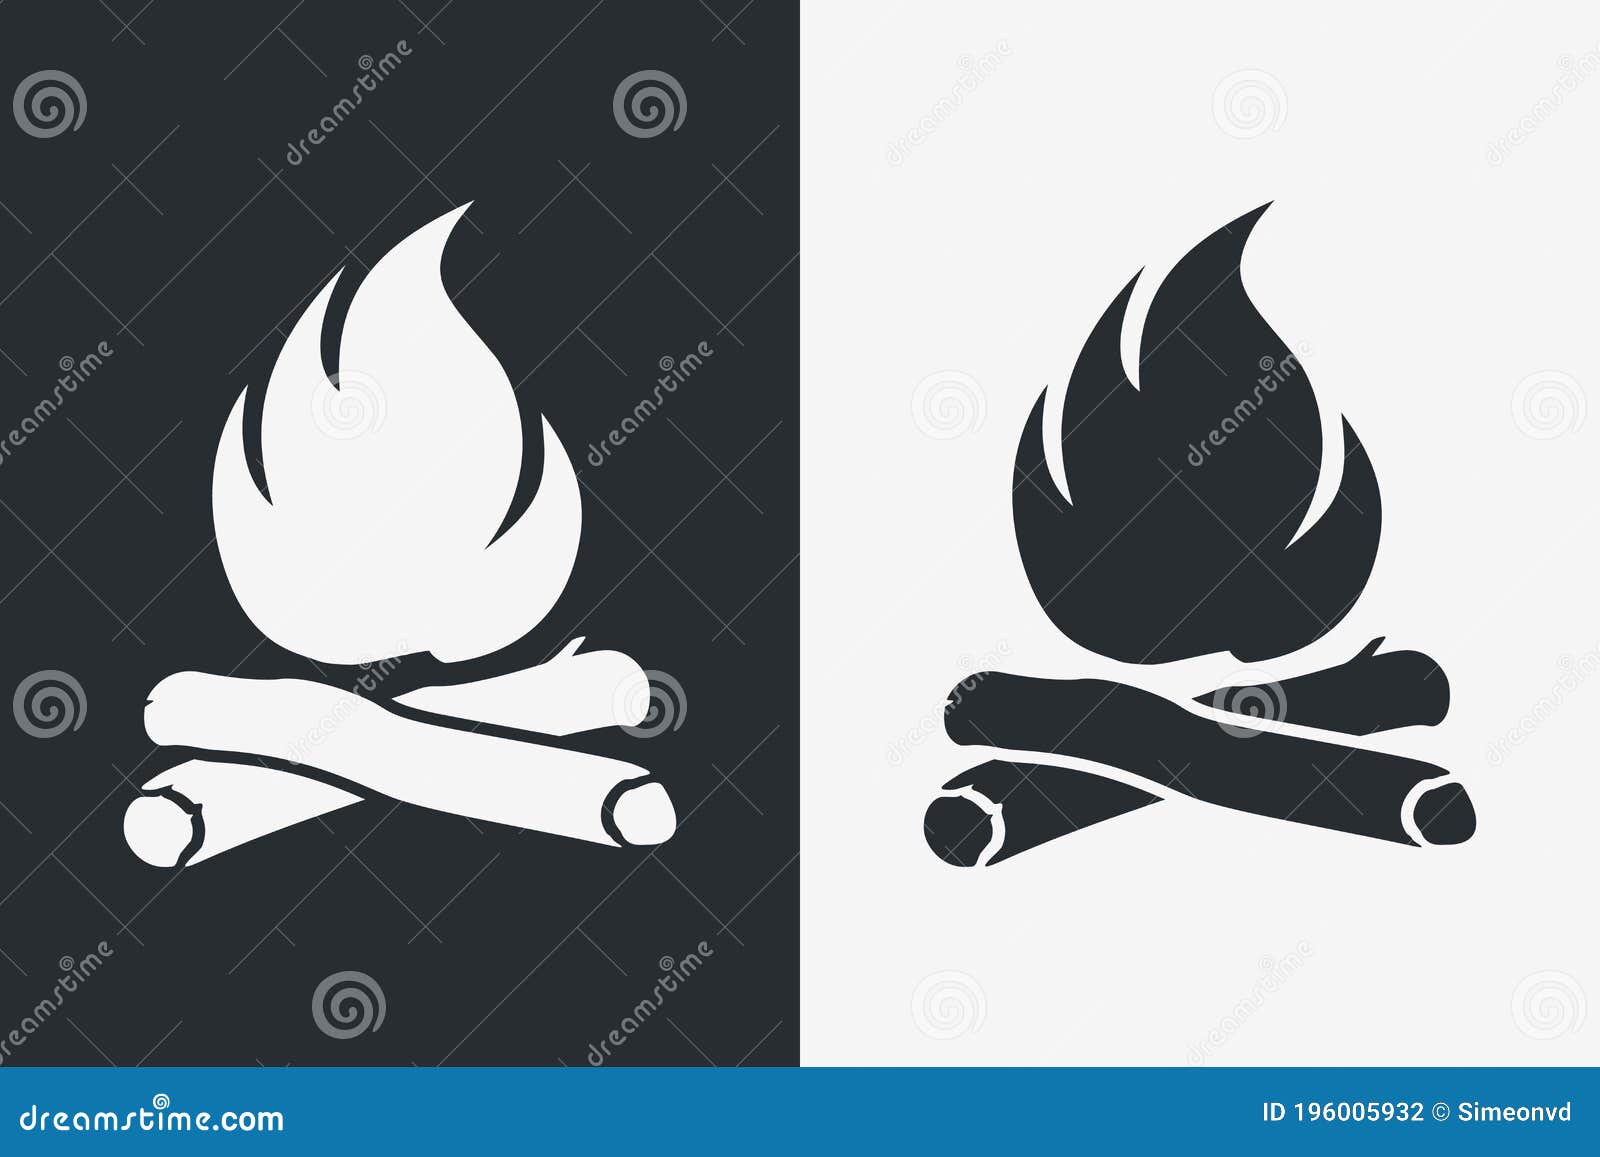 campfire silhouette.dagger silhouette on light and dark background.  bonfire and firewood. simple sign logo or tattoo